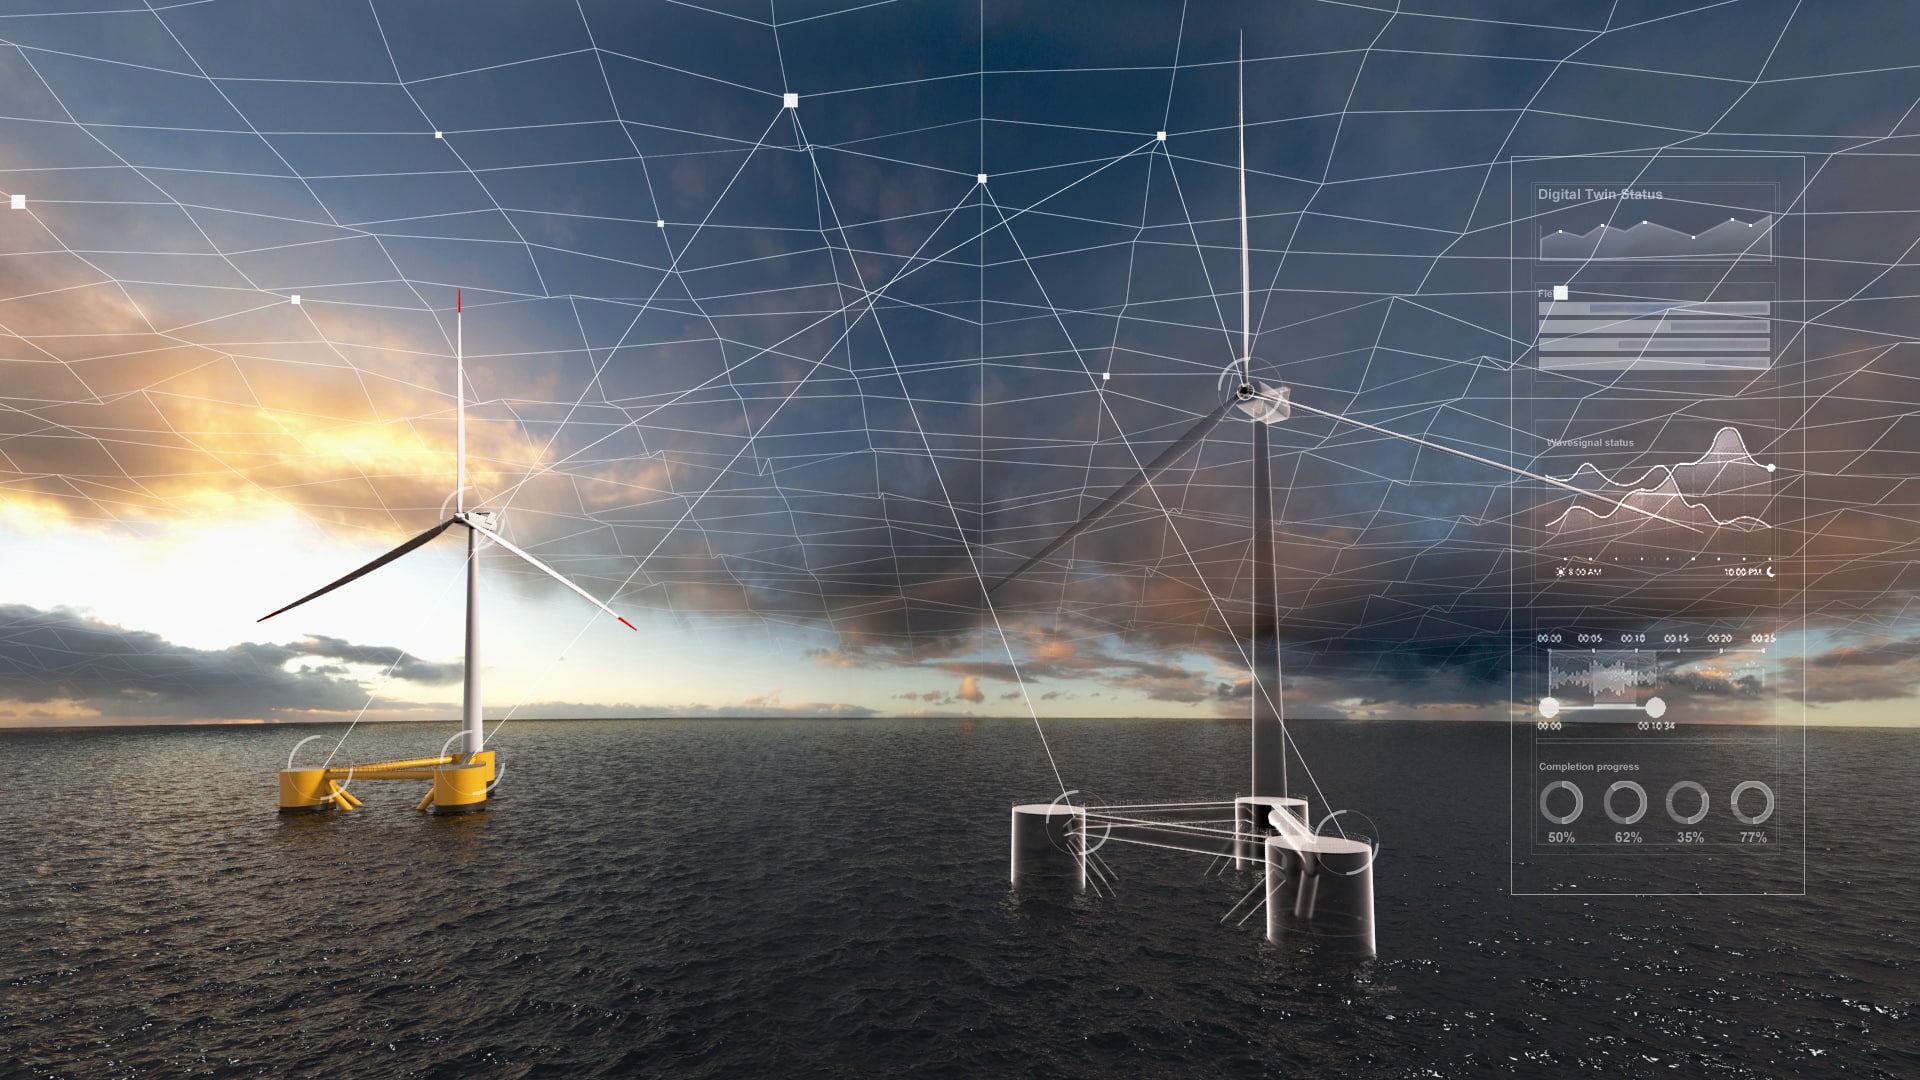 CGI of NextWind Digital Environmental and Production Monitoring - showing a real offshore wind turbine and a digital twin offshore wind turbine used for data analysis - Mainstream Renewable Power Digitalisation